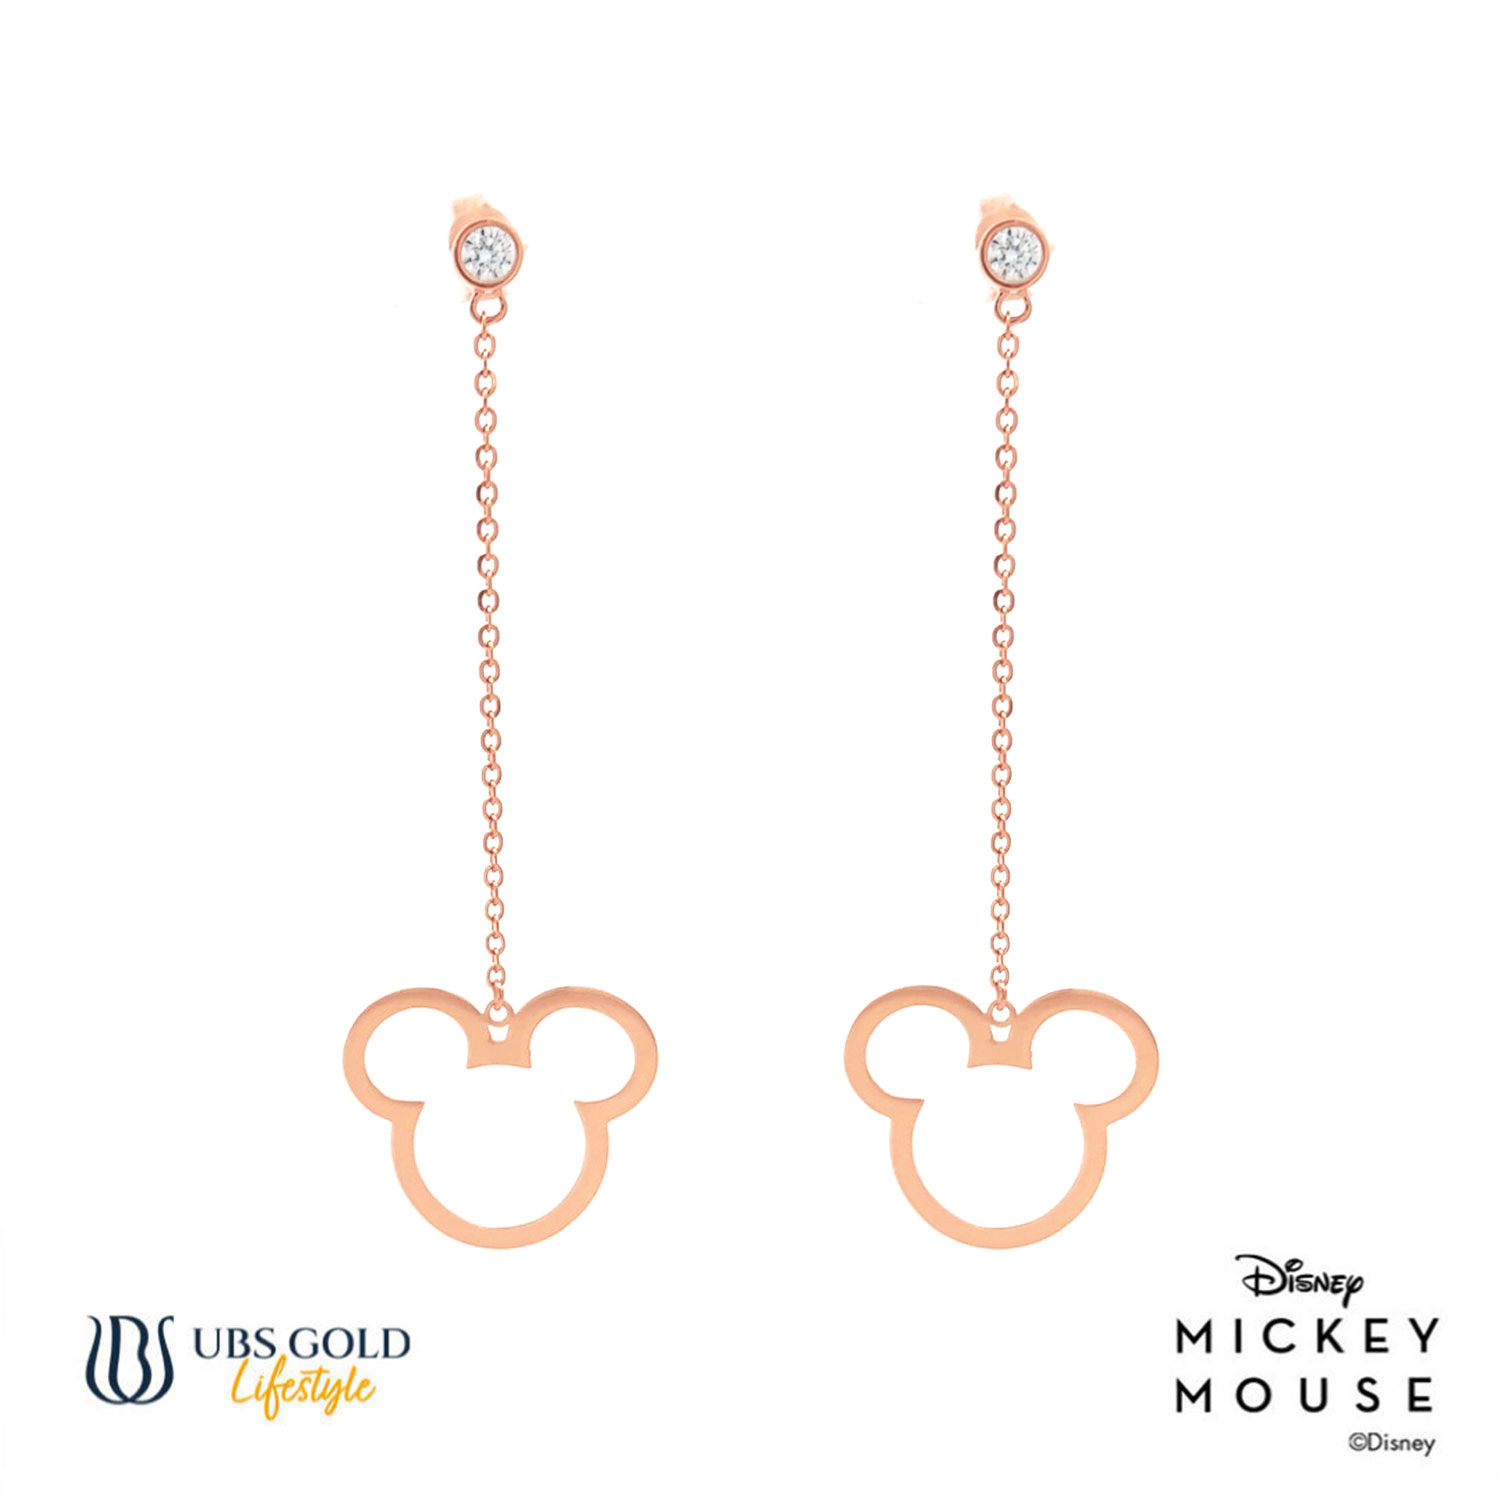 UBS Gold Anting Emas Disney Mickey Mouse - Ewy0001 - 17K